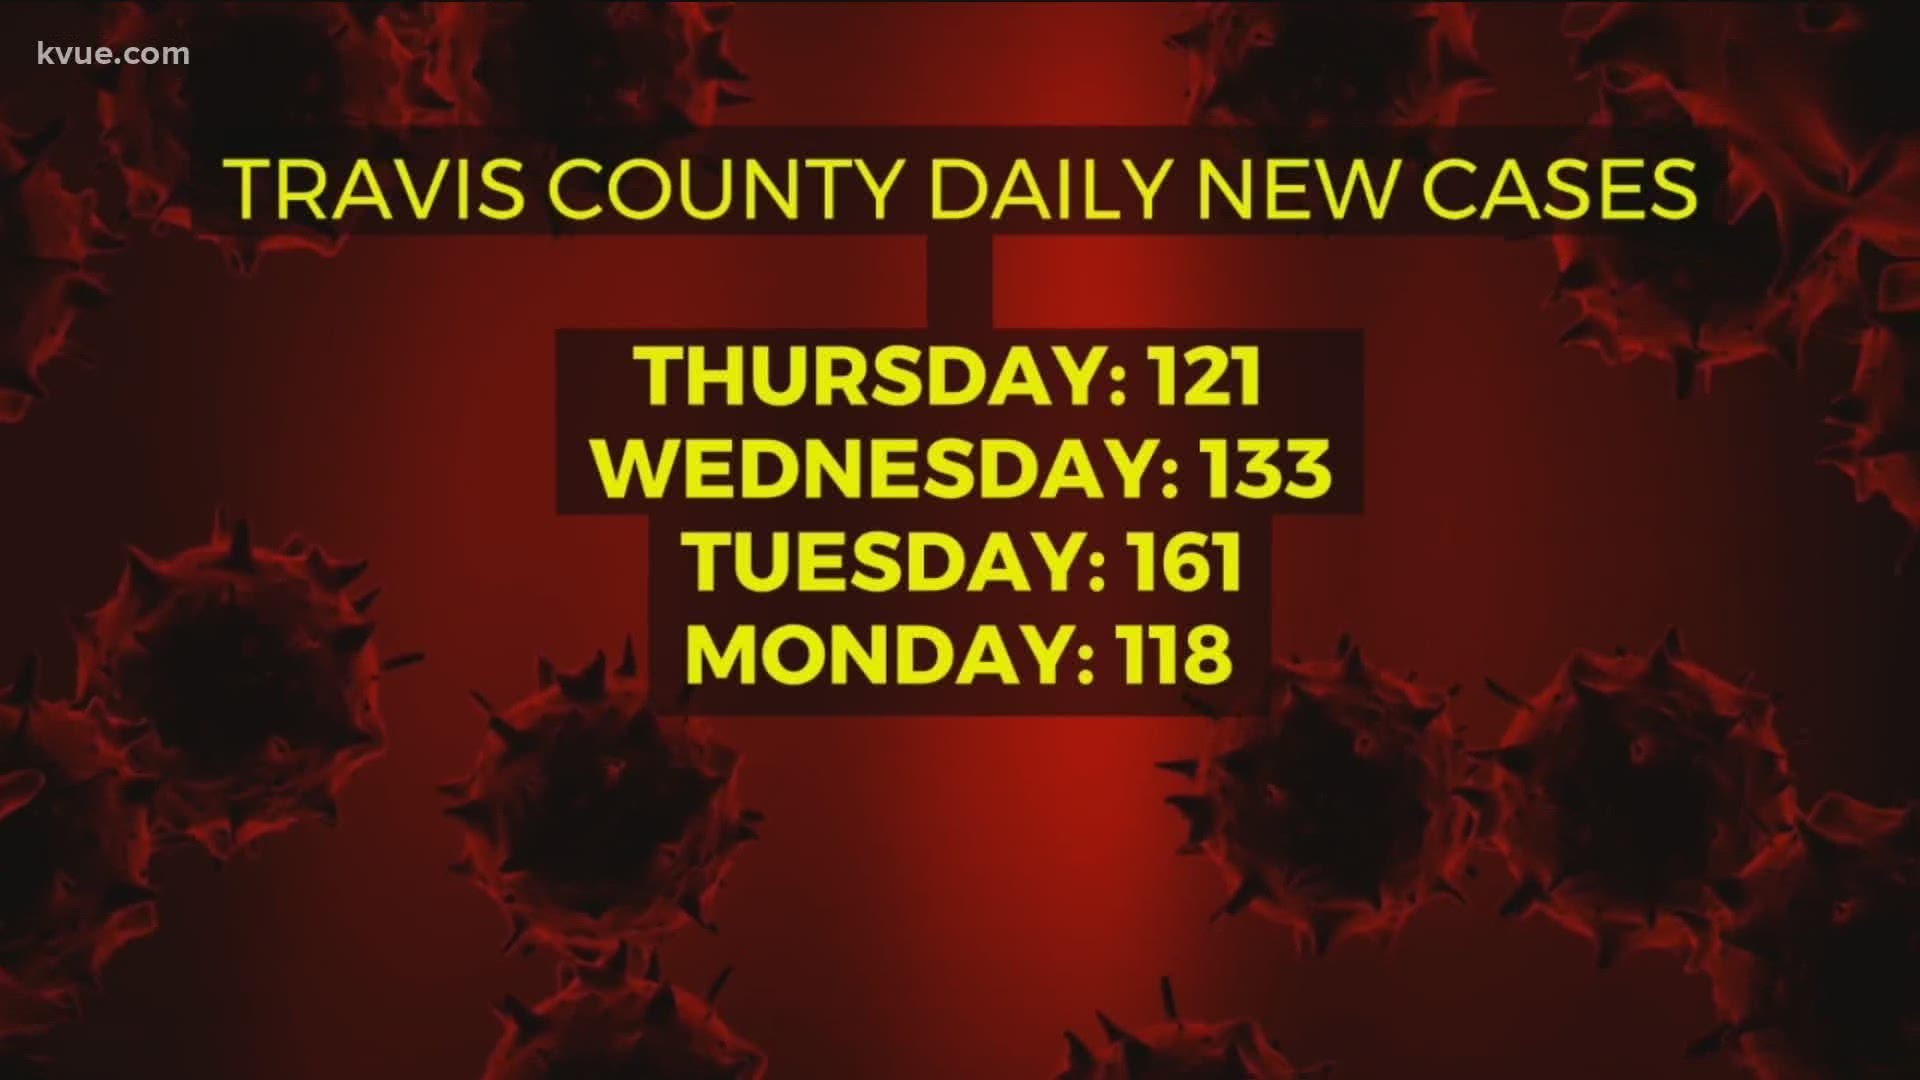 We've seen coronavirus cases ticking up steadily since Texas reopened on May 1.